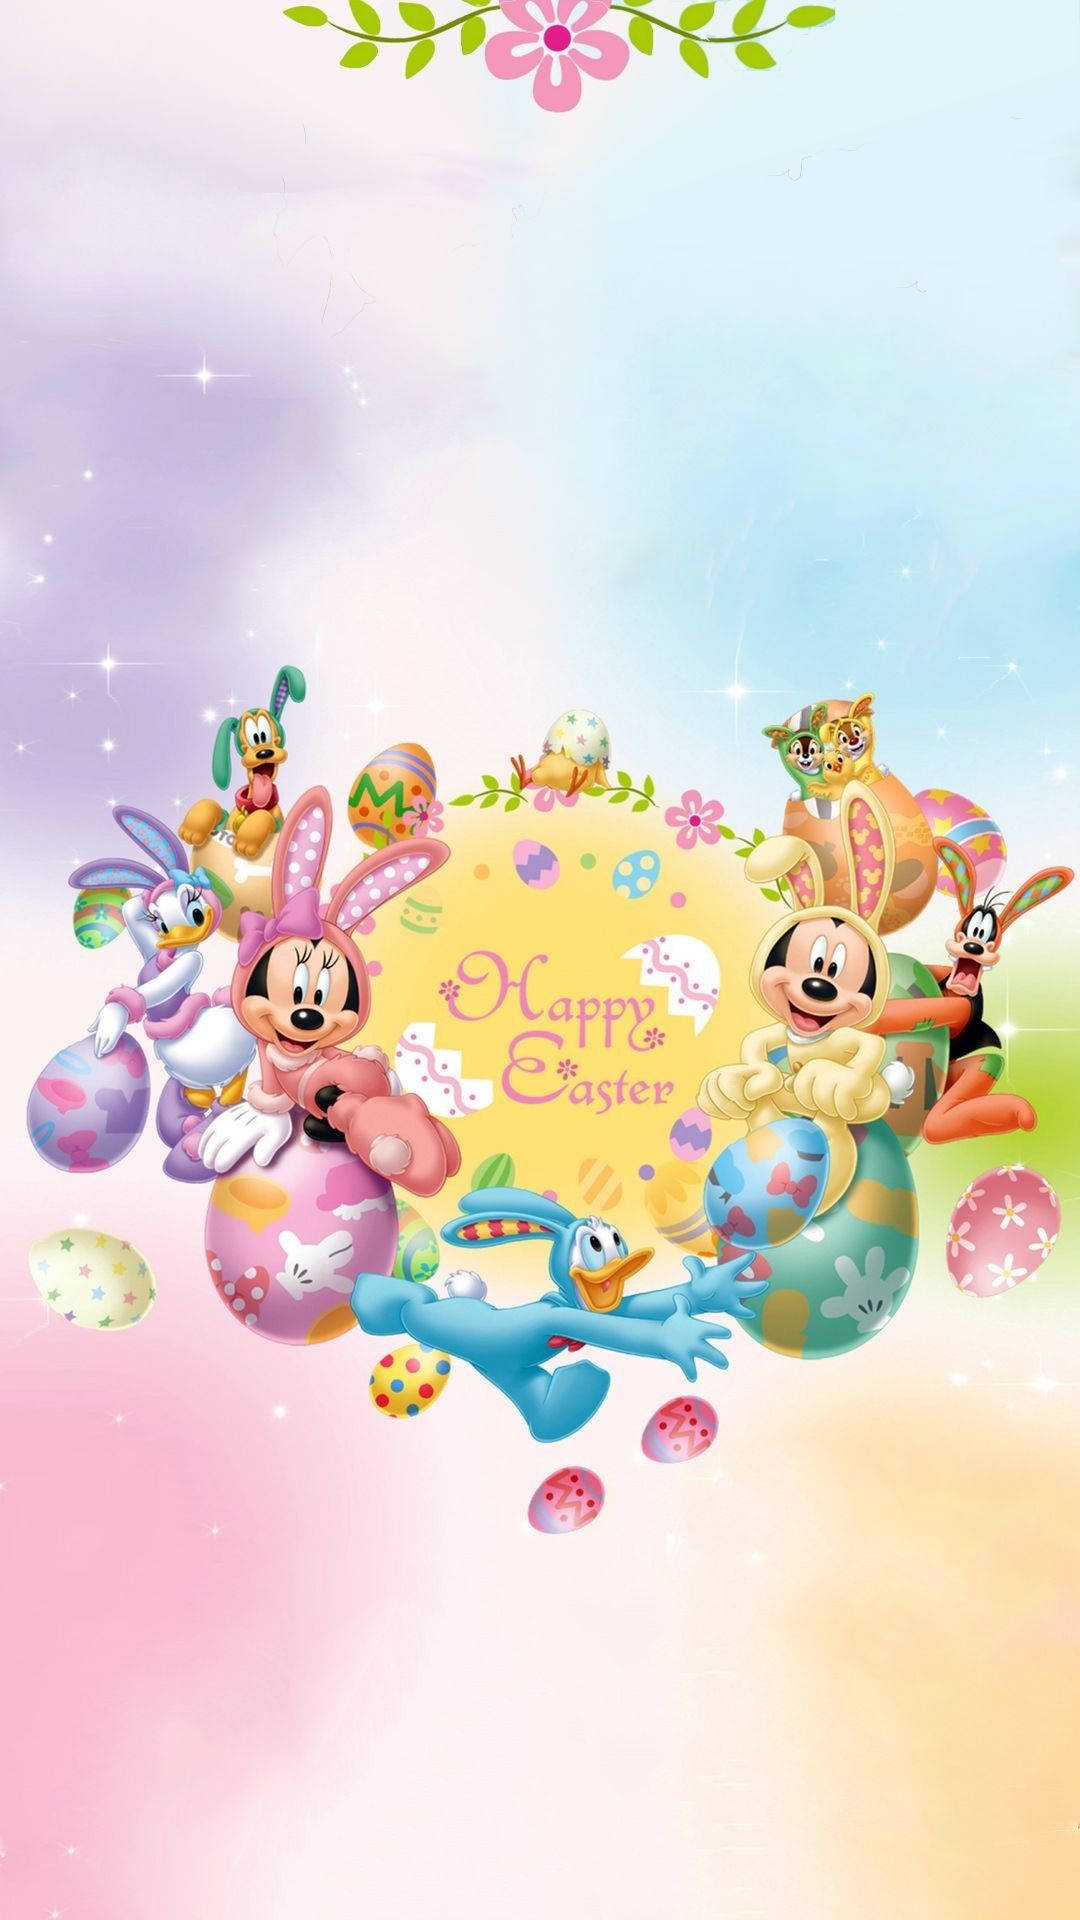 Mickey Mouse Clubhouse Happy Easter Poster Wallpaper